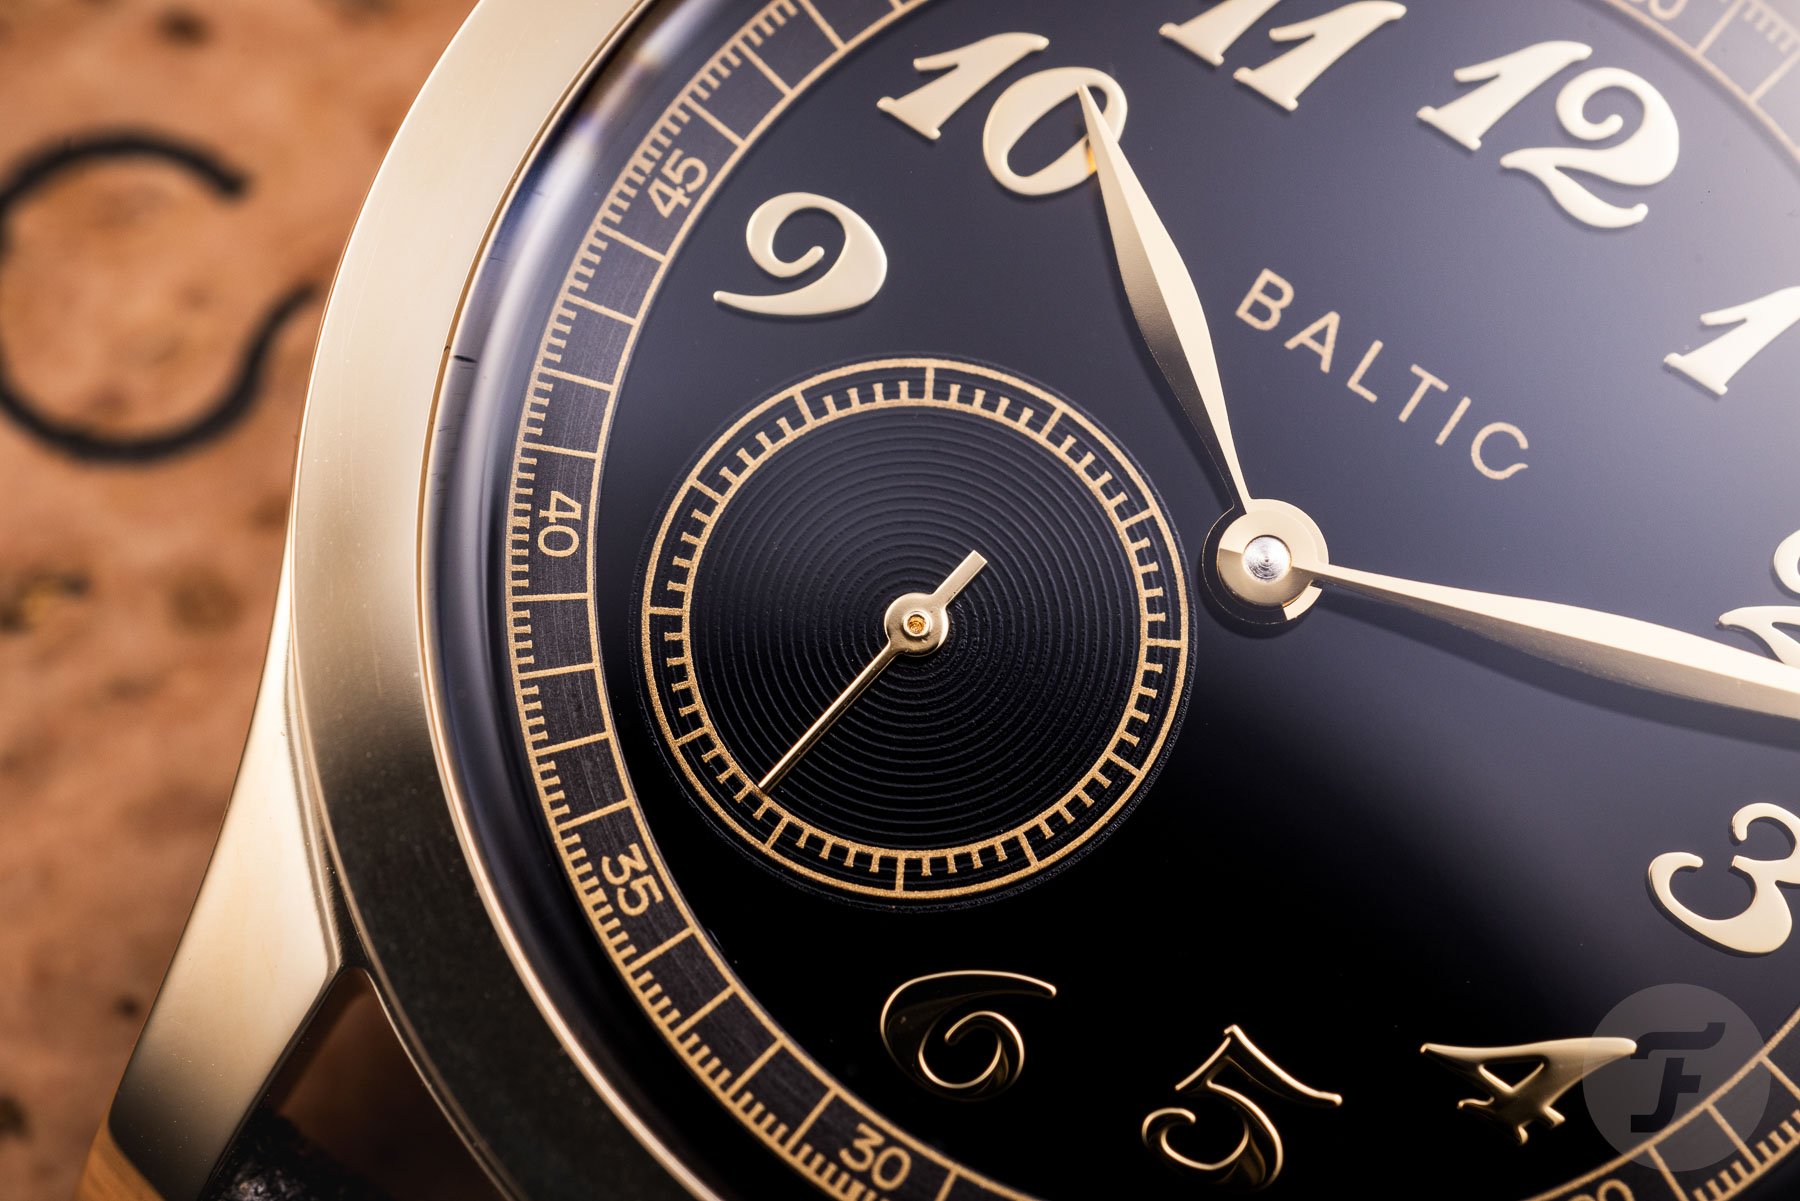 Baltic Gold PVD MR01 dial close-up